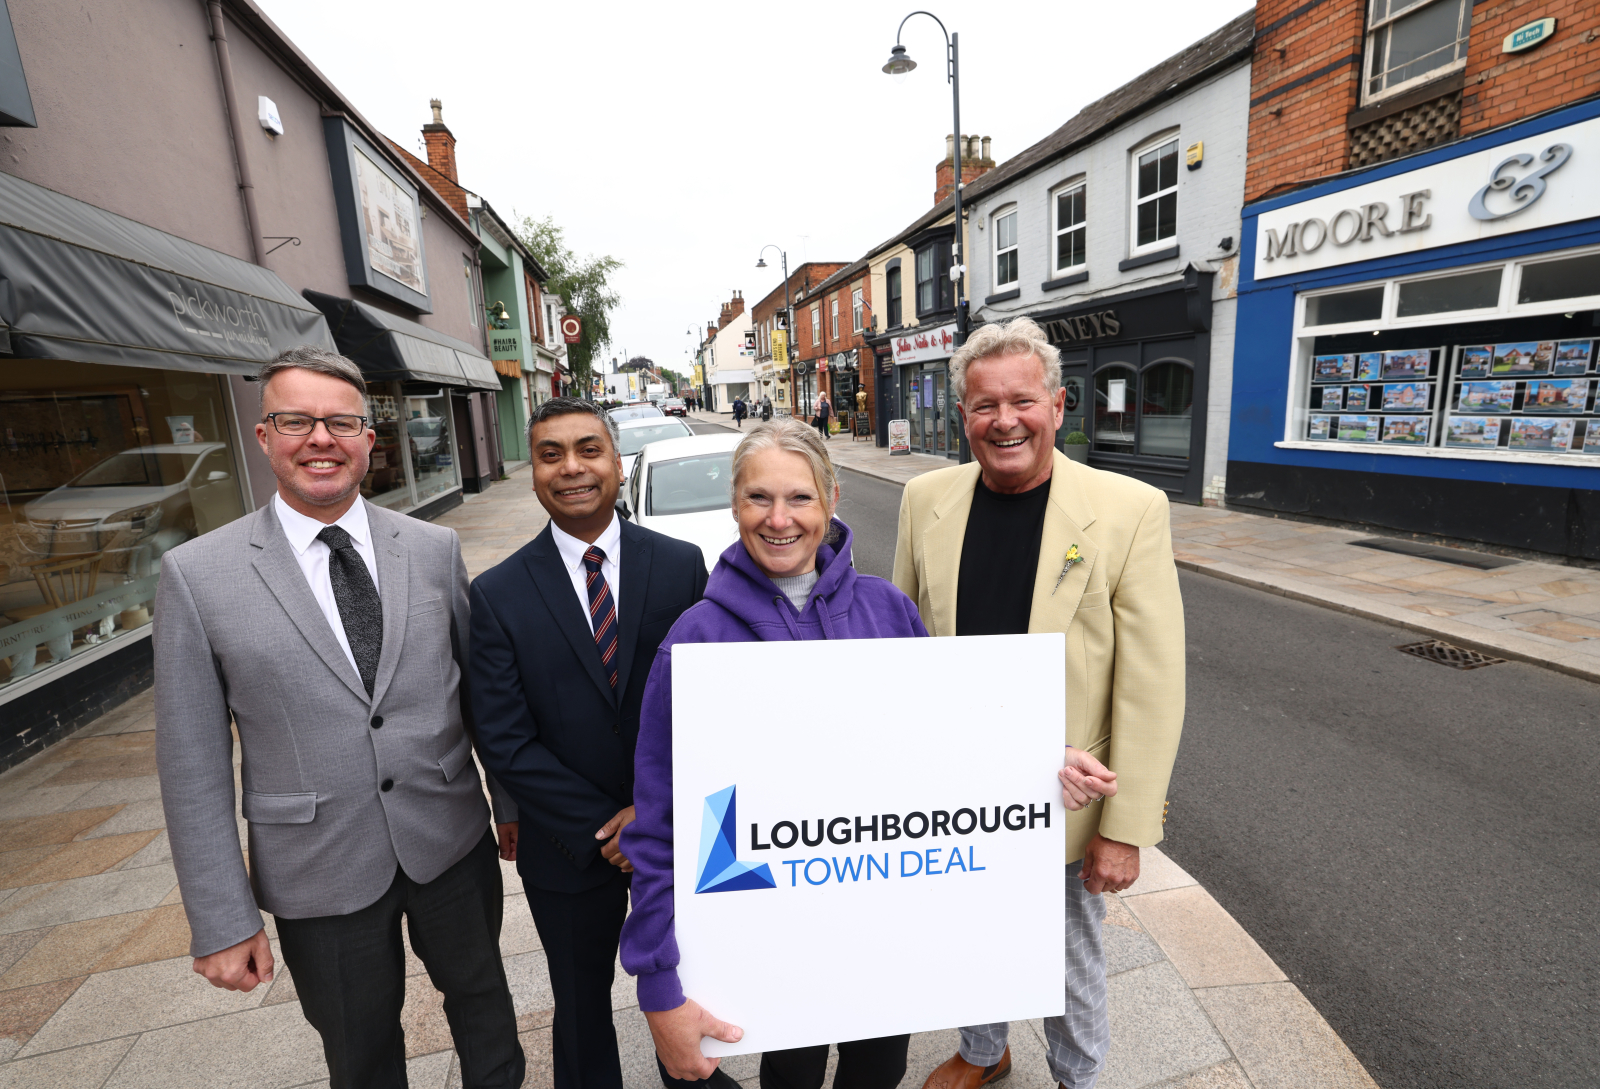 Free wi-fi extended across Loughborough town centre thanks to Town Deal-backed project